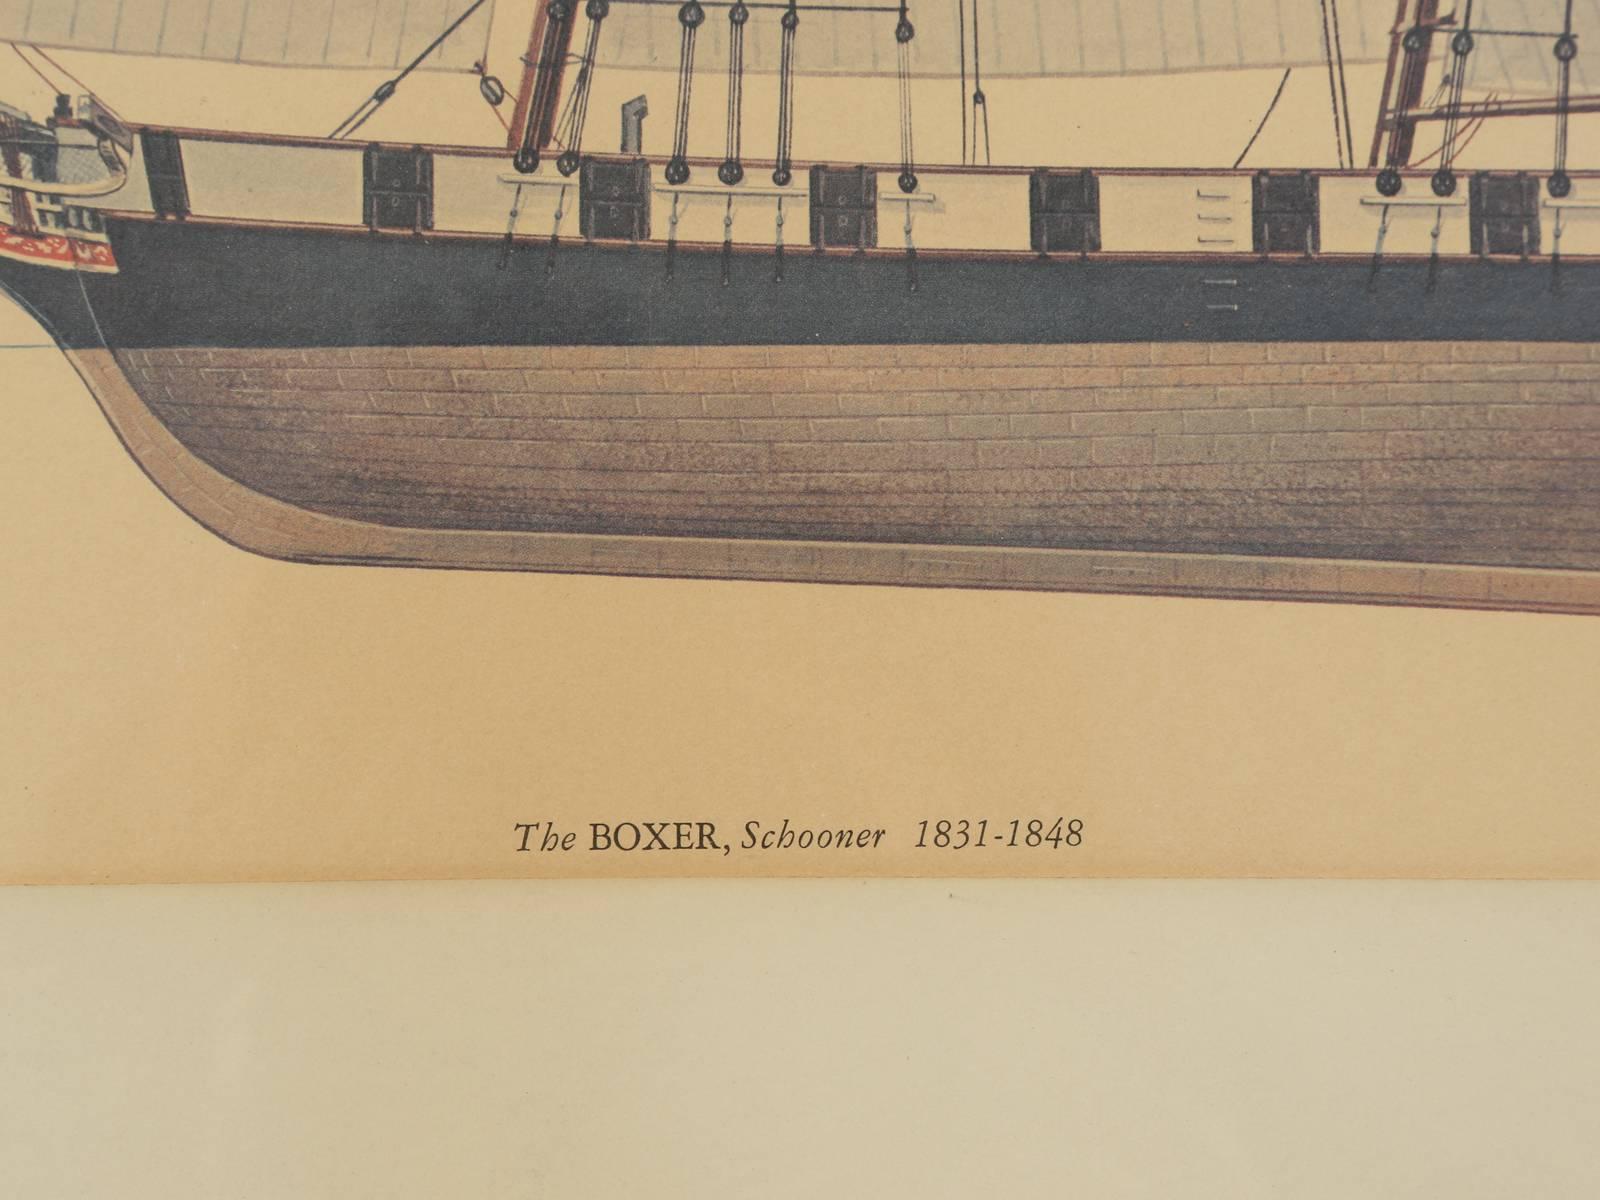 20th Century Print of a Sailing Ship from the Glenview Naval Air Station